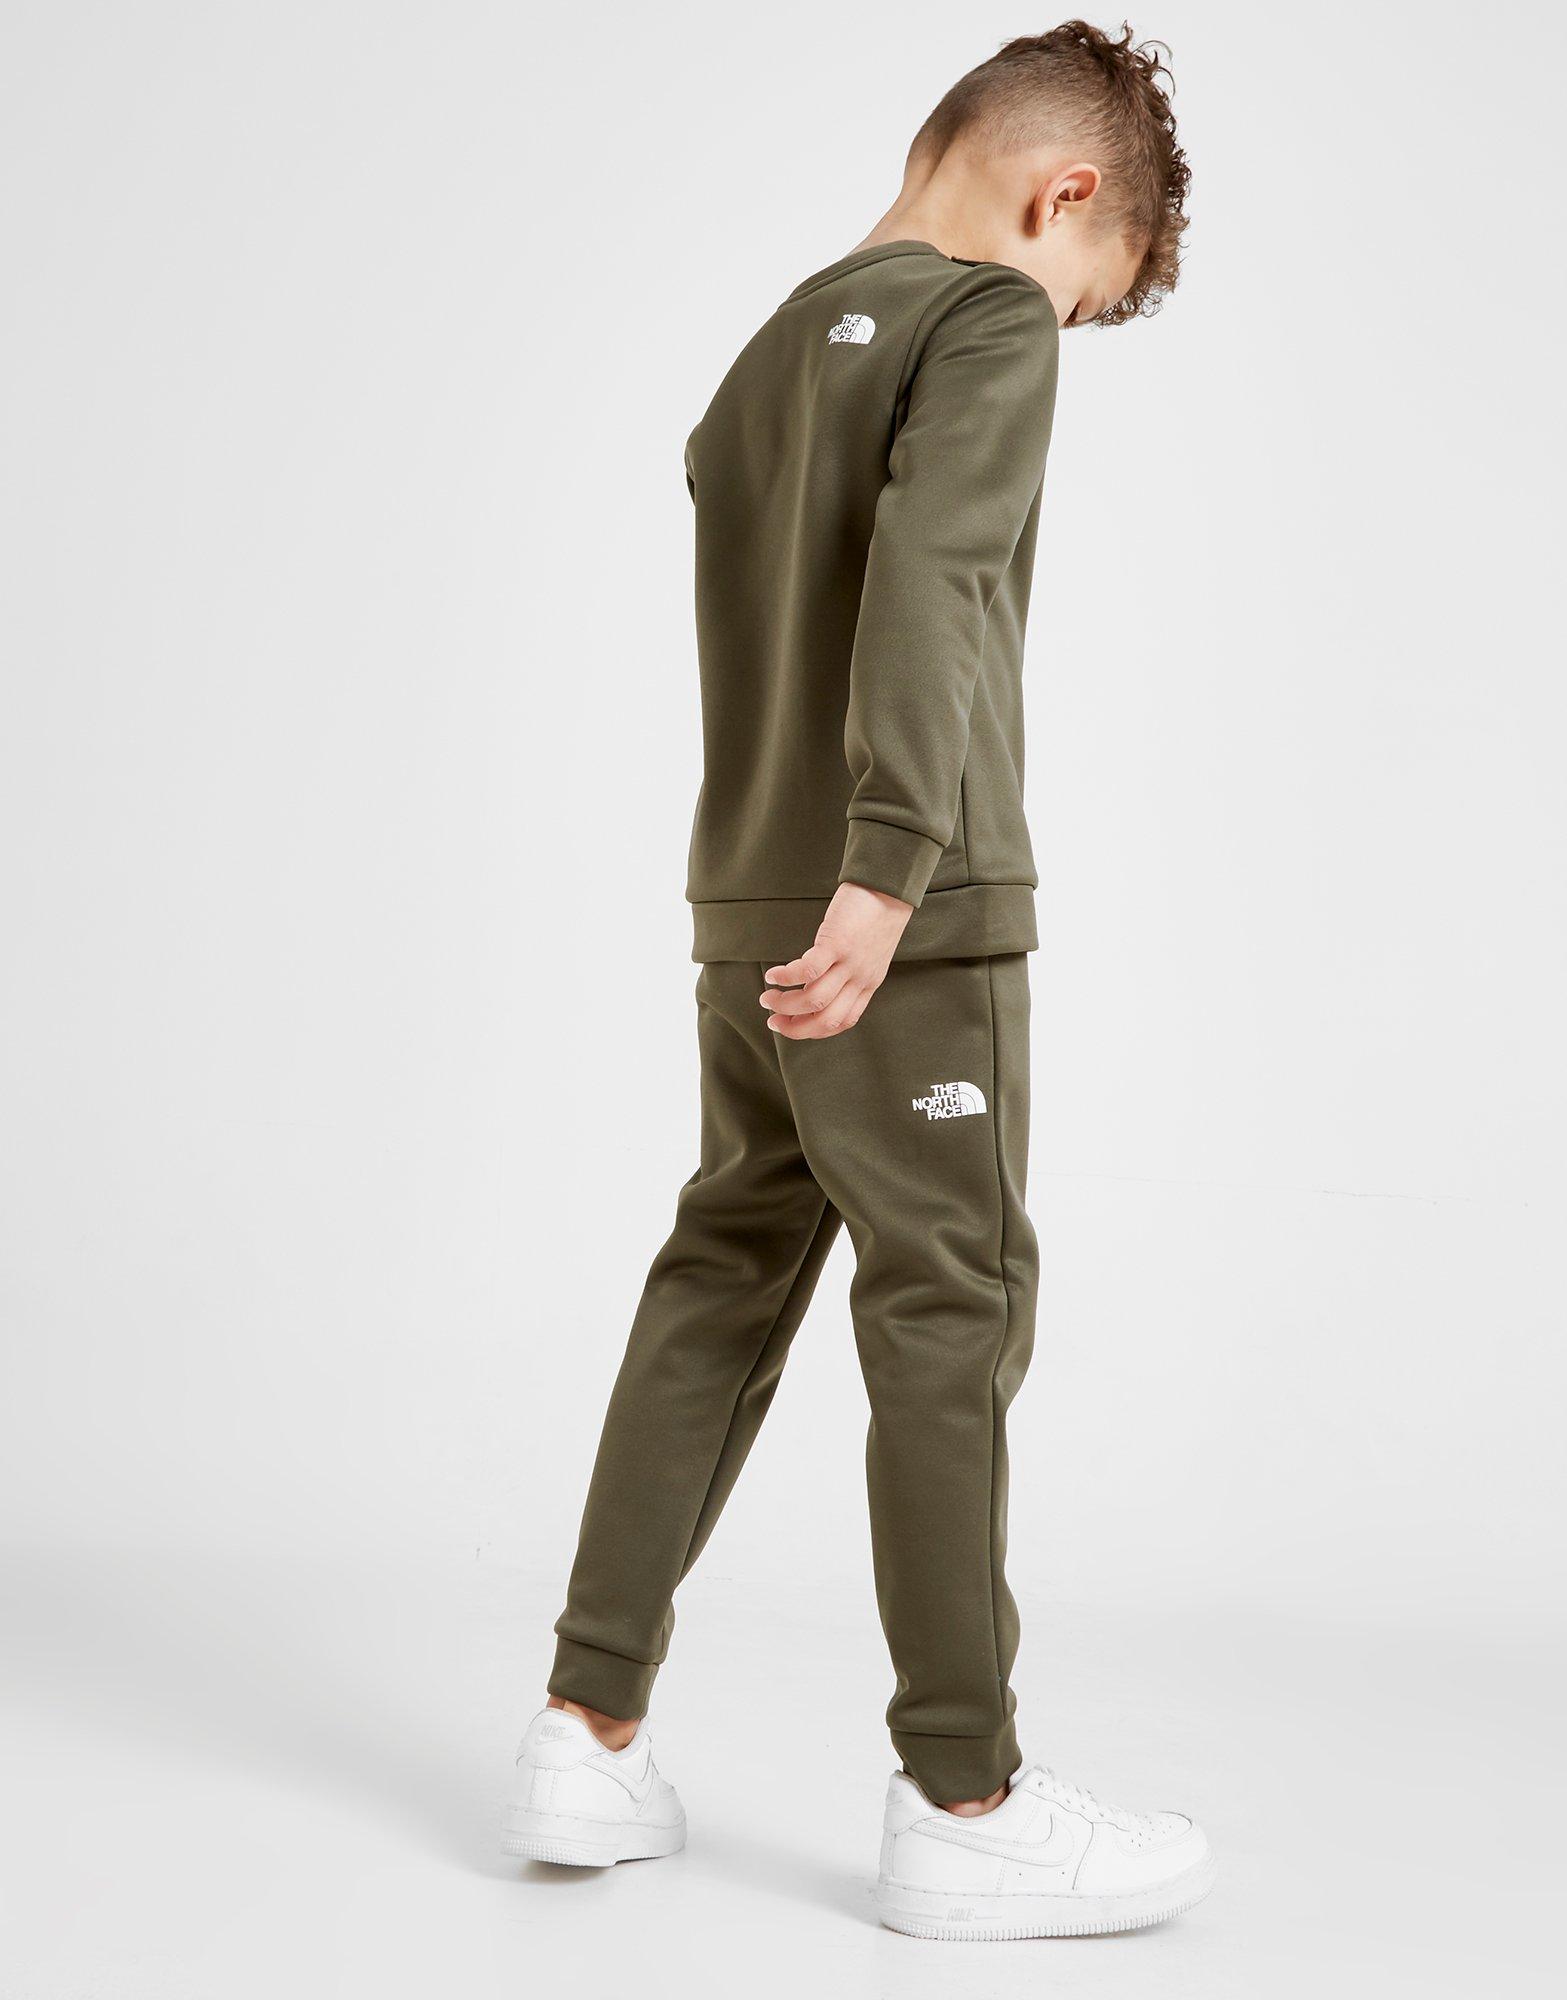 north face boys track suit